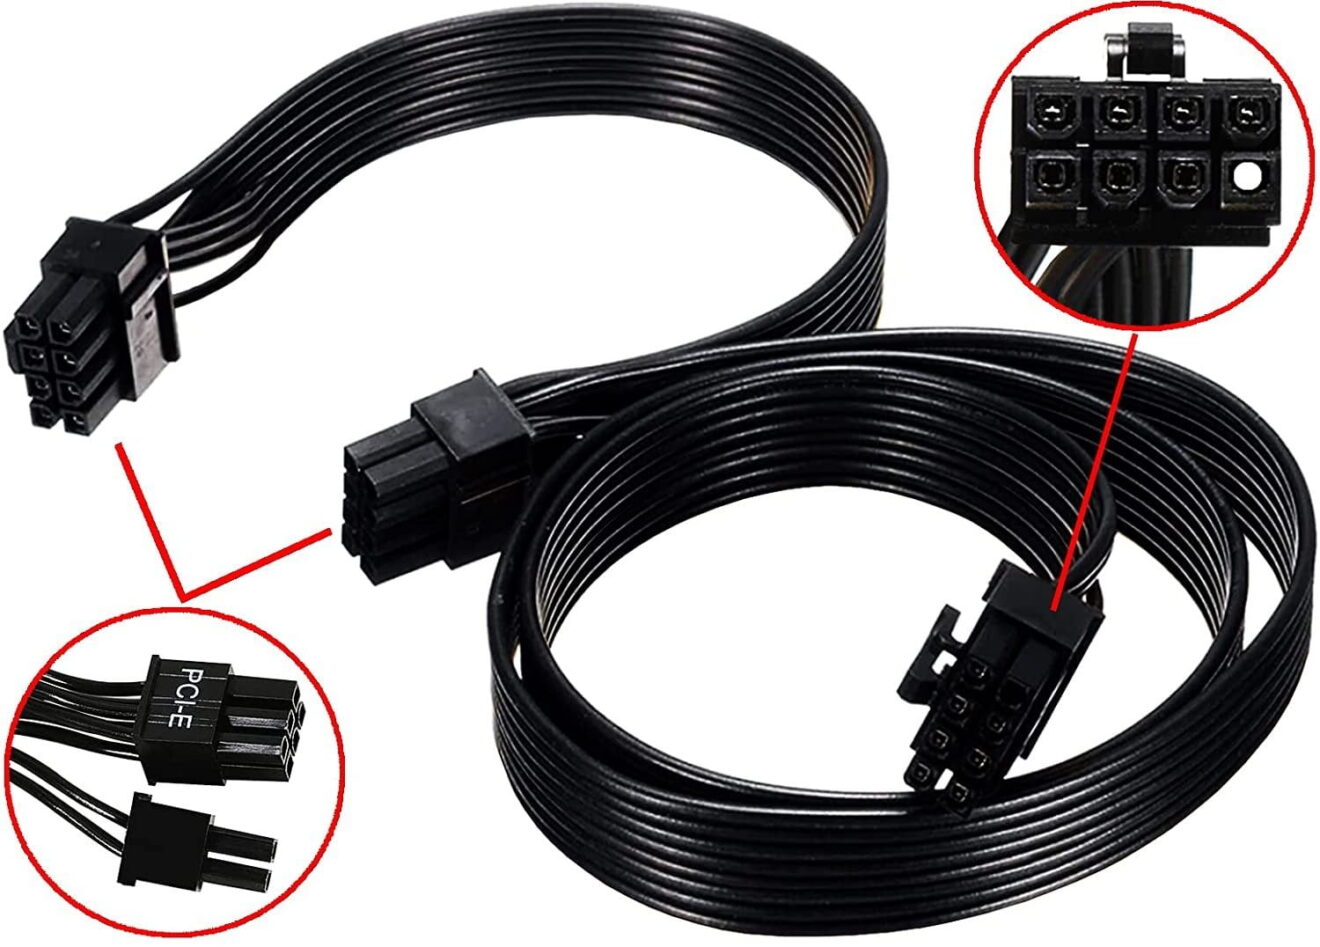 Corsair 8 Pin Male to Dual PCIe 862 Pin Male Power Cable main